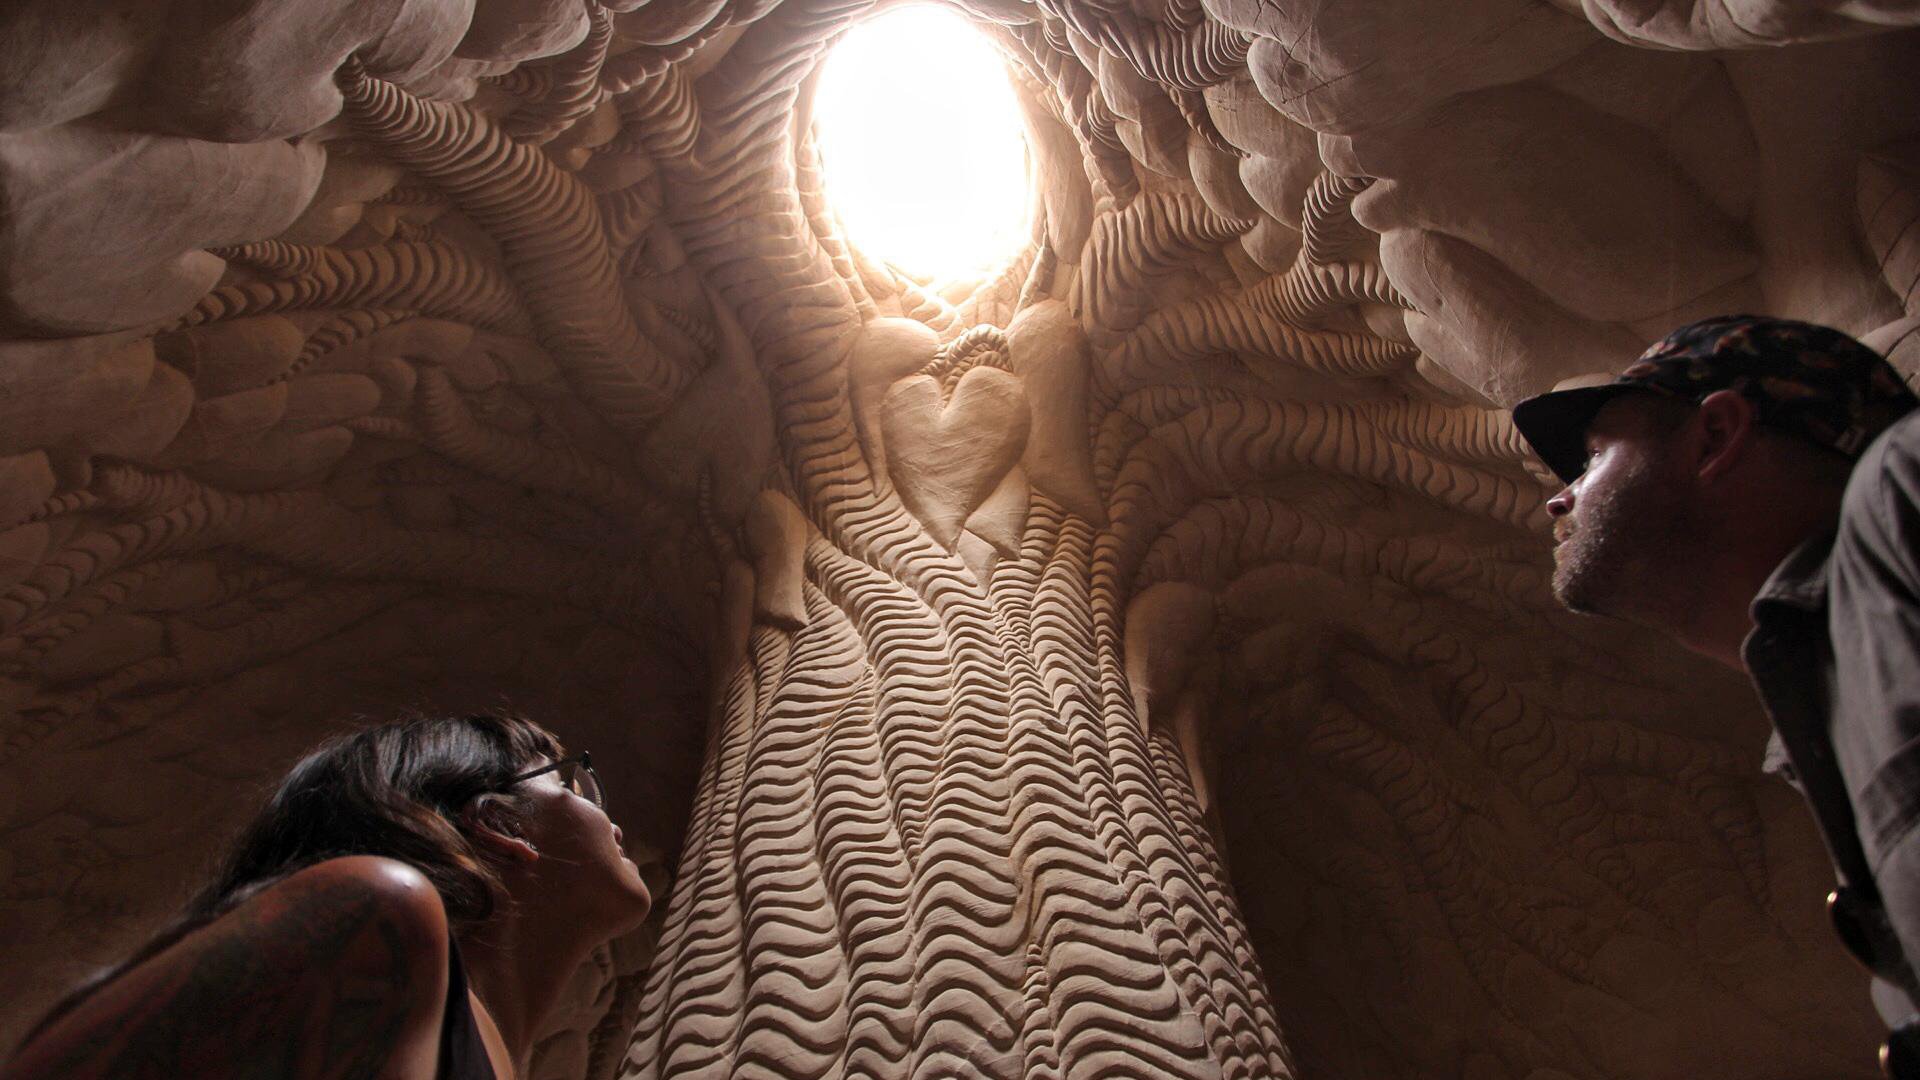 Tyson documents an exploration of a cave outside Sante Fe, filled with sandstone carvings by artist Robert “Ra” Paulette.